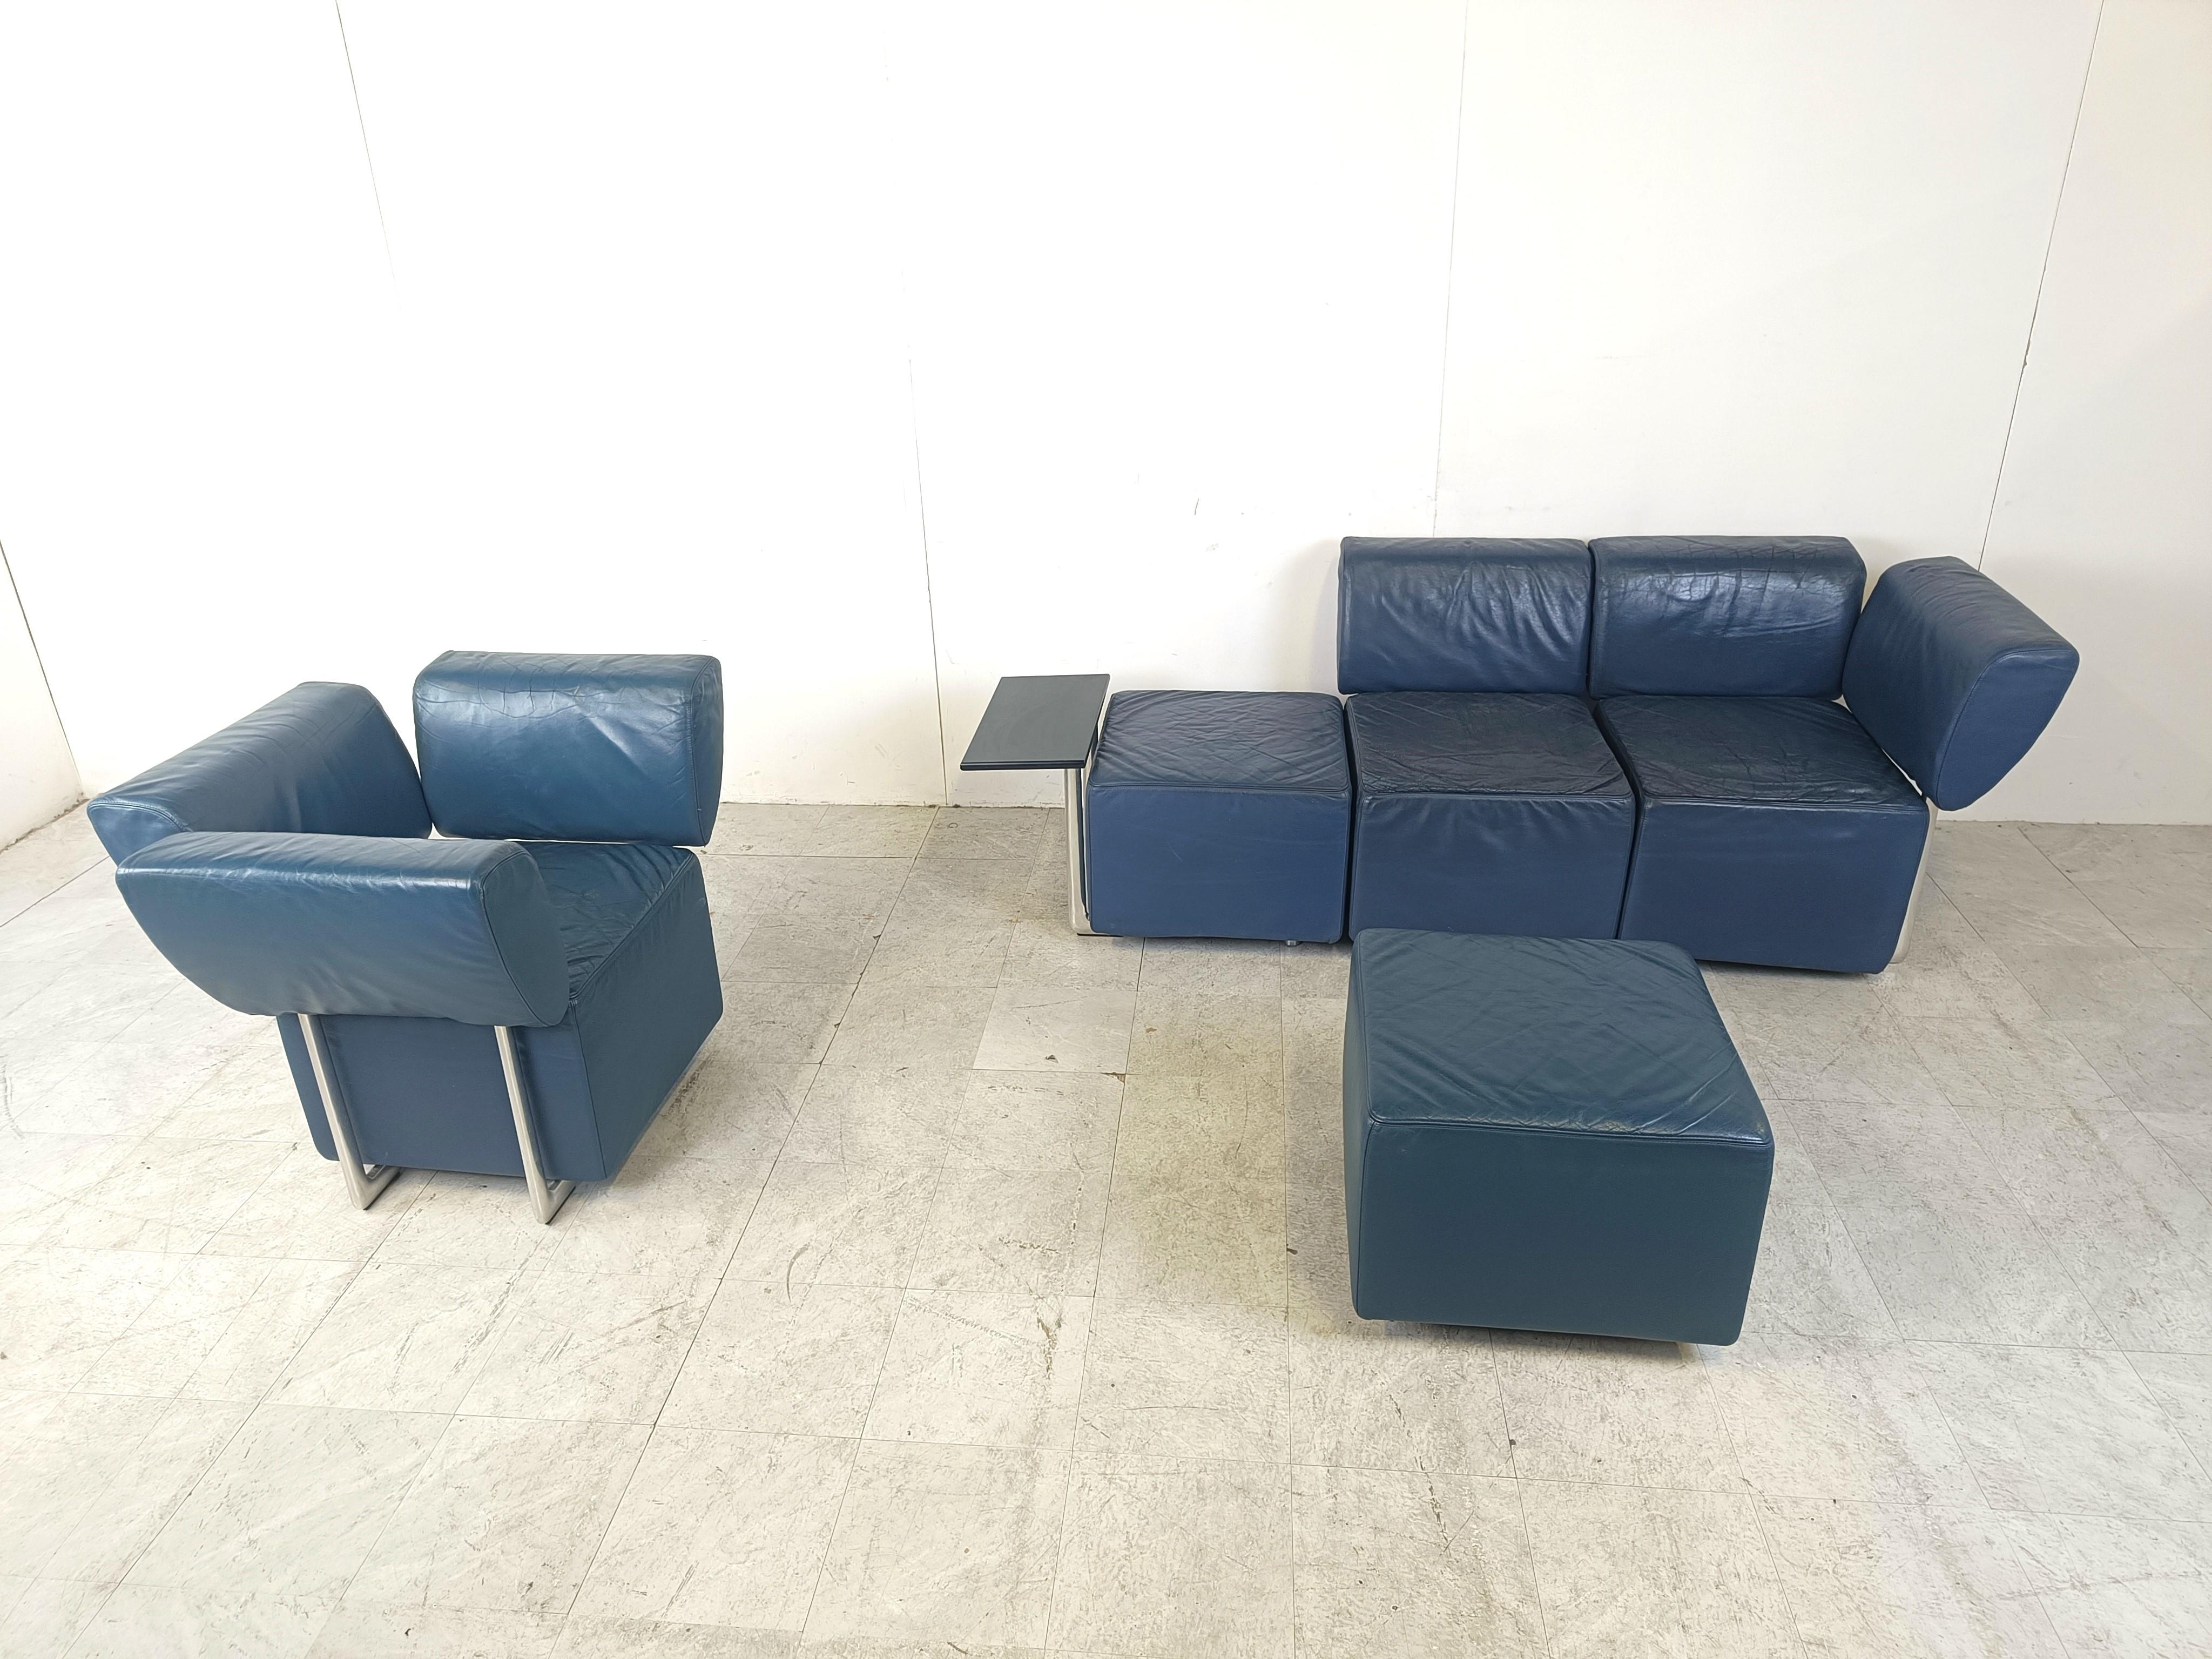 Striking postmodern design sofa model 'Clou' by Cor and designed by Wulf Schneider. 

Well designed and upholstered with high quality blue leather on chrome bases.

The three seater has a little table attached to it.

The set is completely